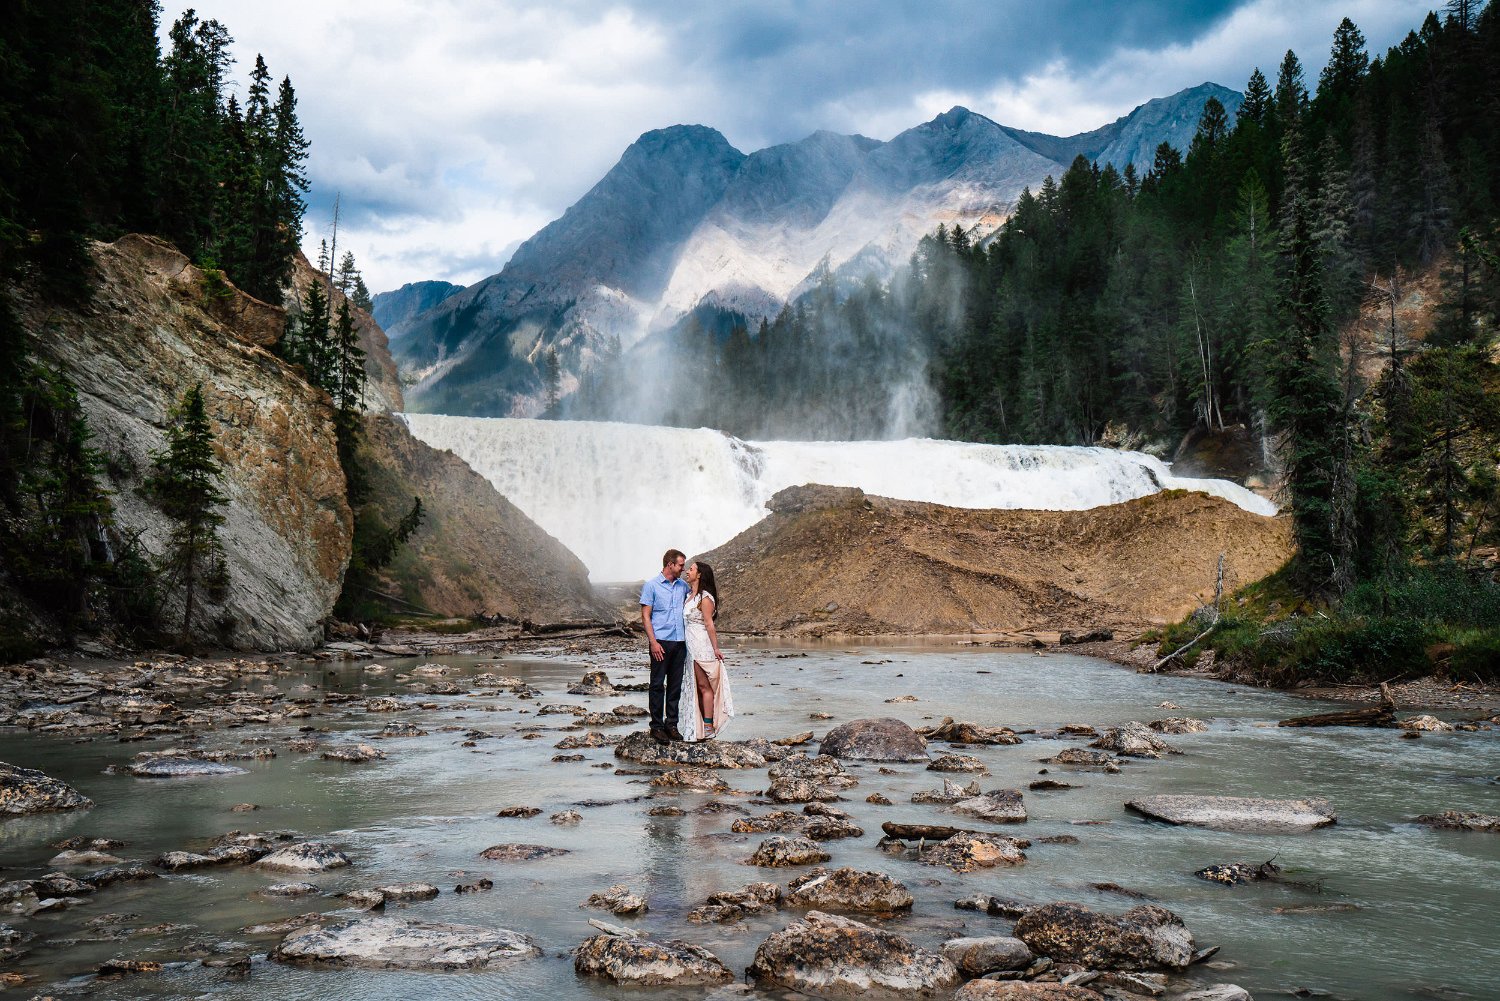 An adventurous couple captures elopement photos in front of a breathtaking waterfall, with majestic mountains as the backdrop.